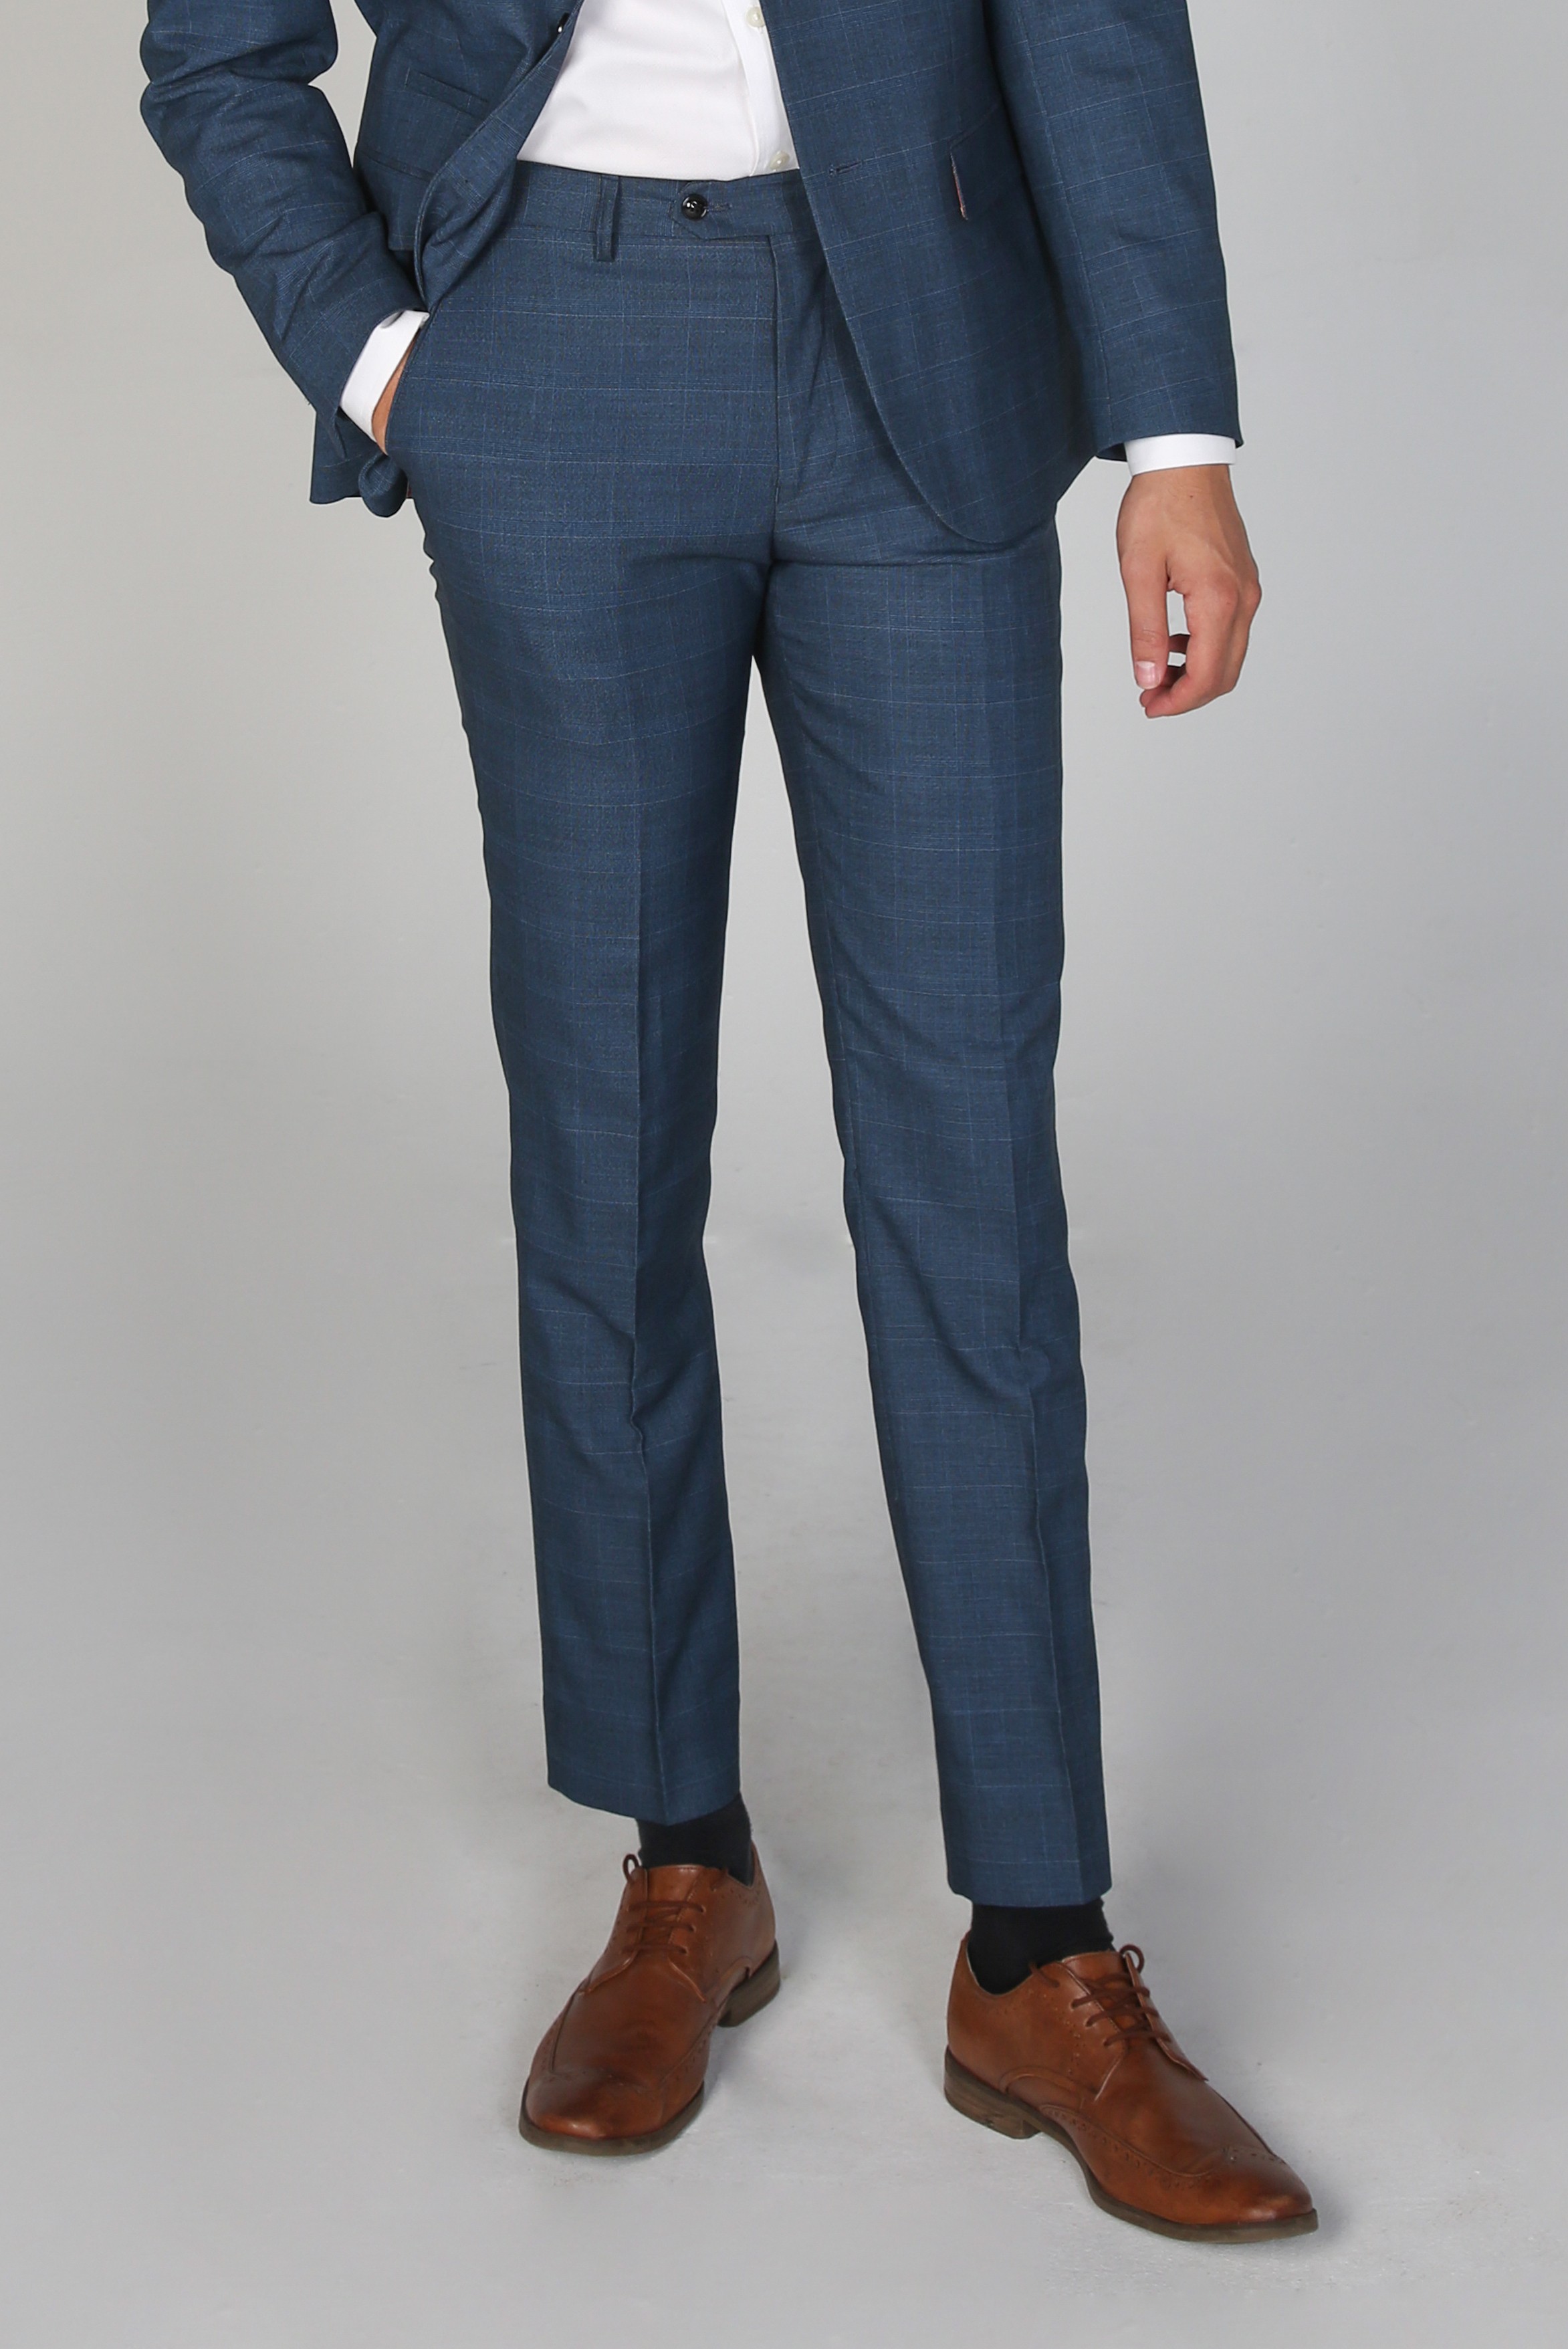 Men's Check Tailored Fit Navy Pants - VICEROY